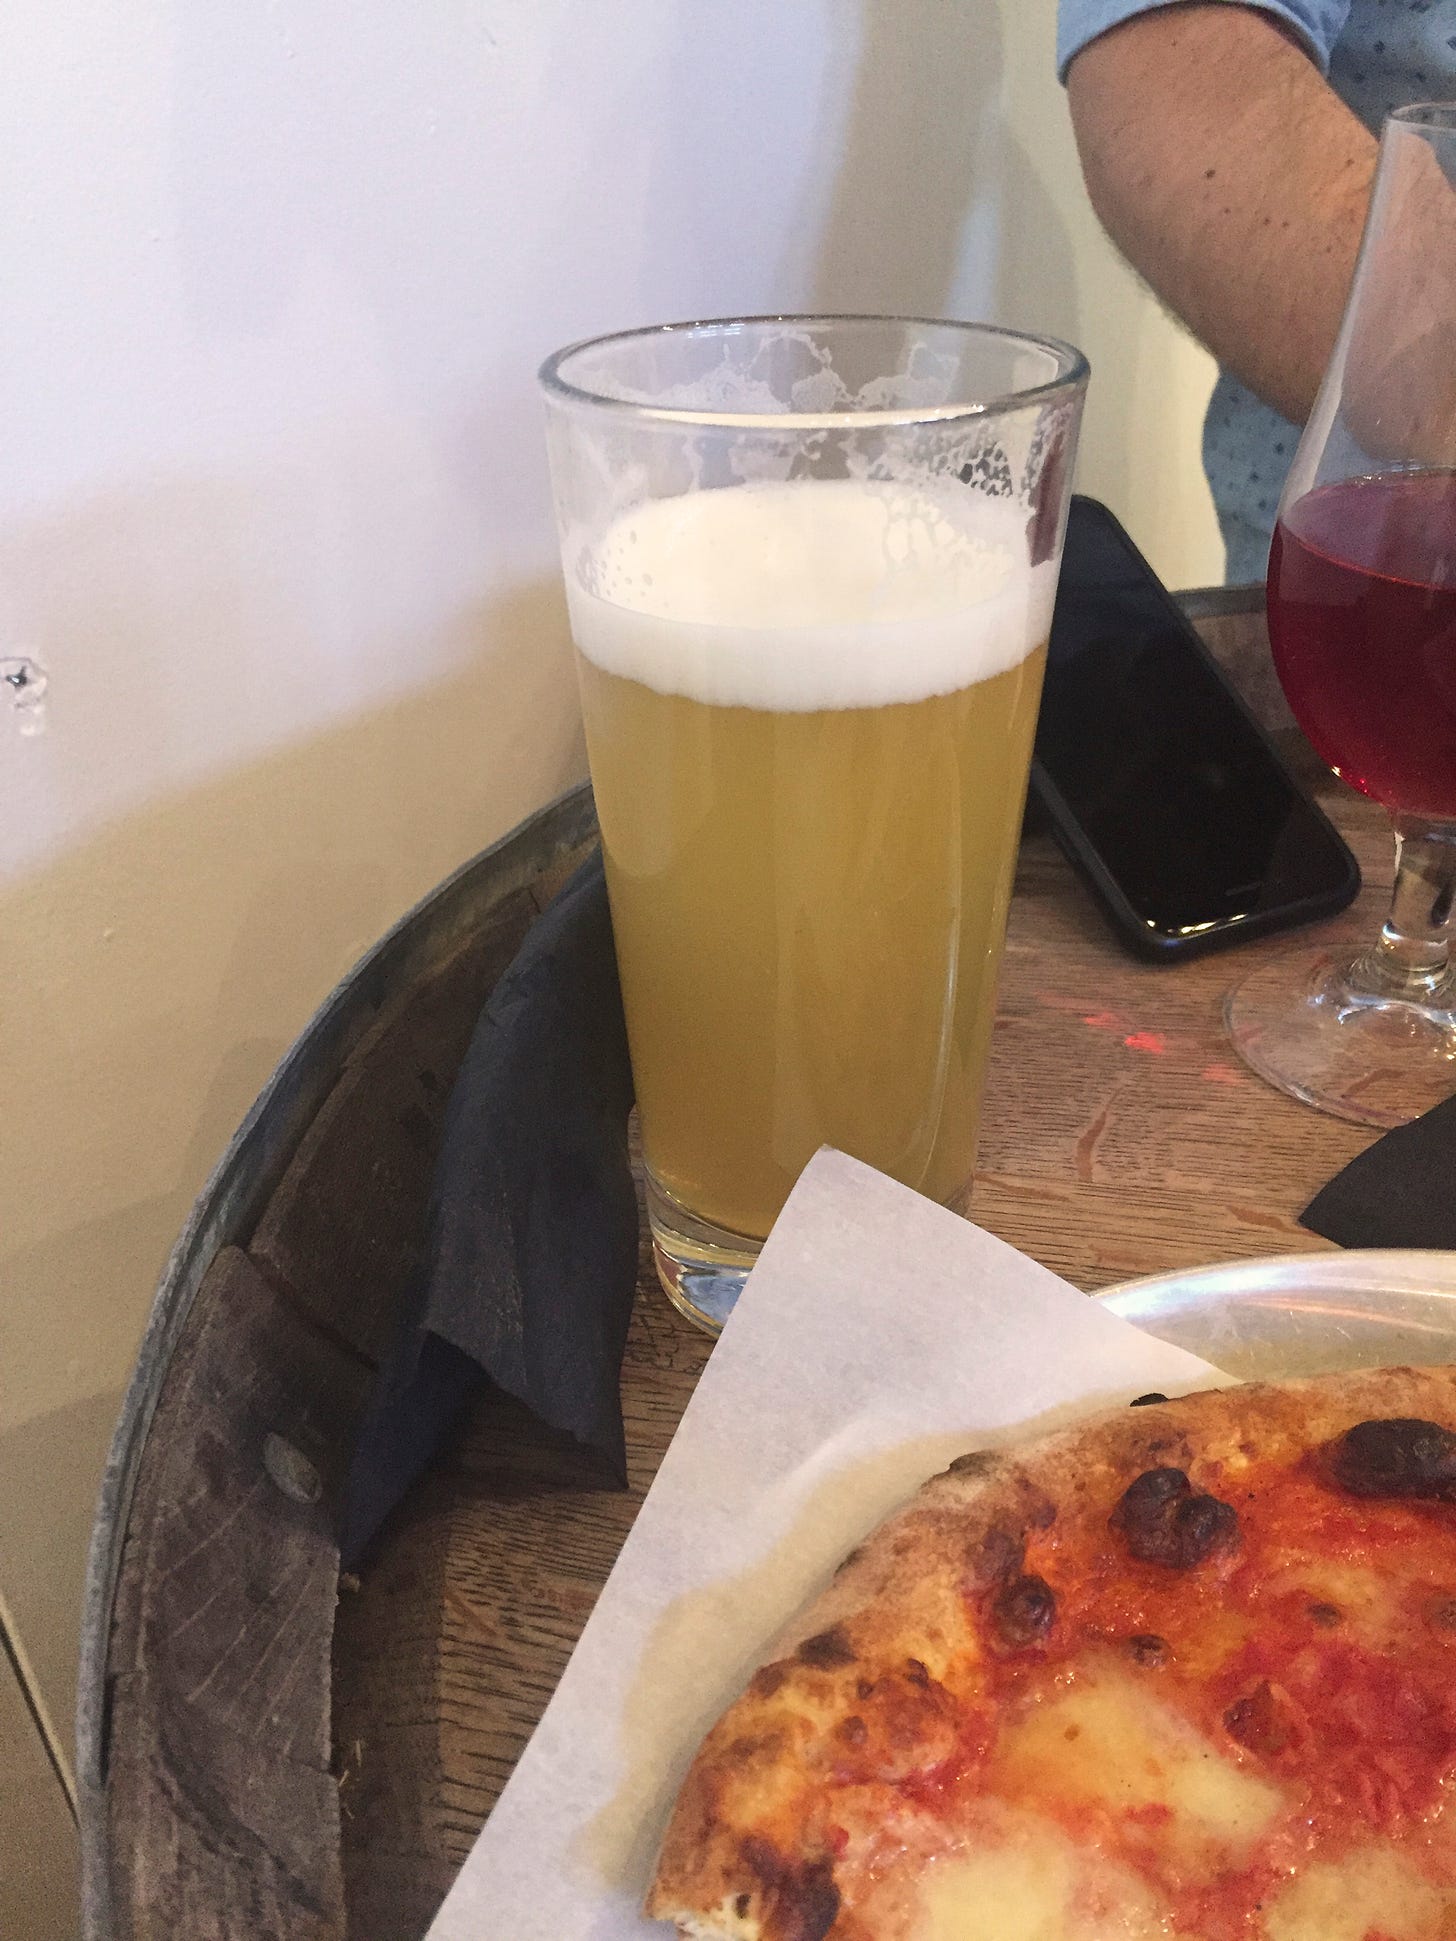 A glass of hazy IPA sits on top of a wooden barrel. At the corner of the frame in front of it, part of an Italian pizza is visible. In the background is a tulip glass of pinkish raspberry sour ale.